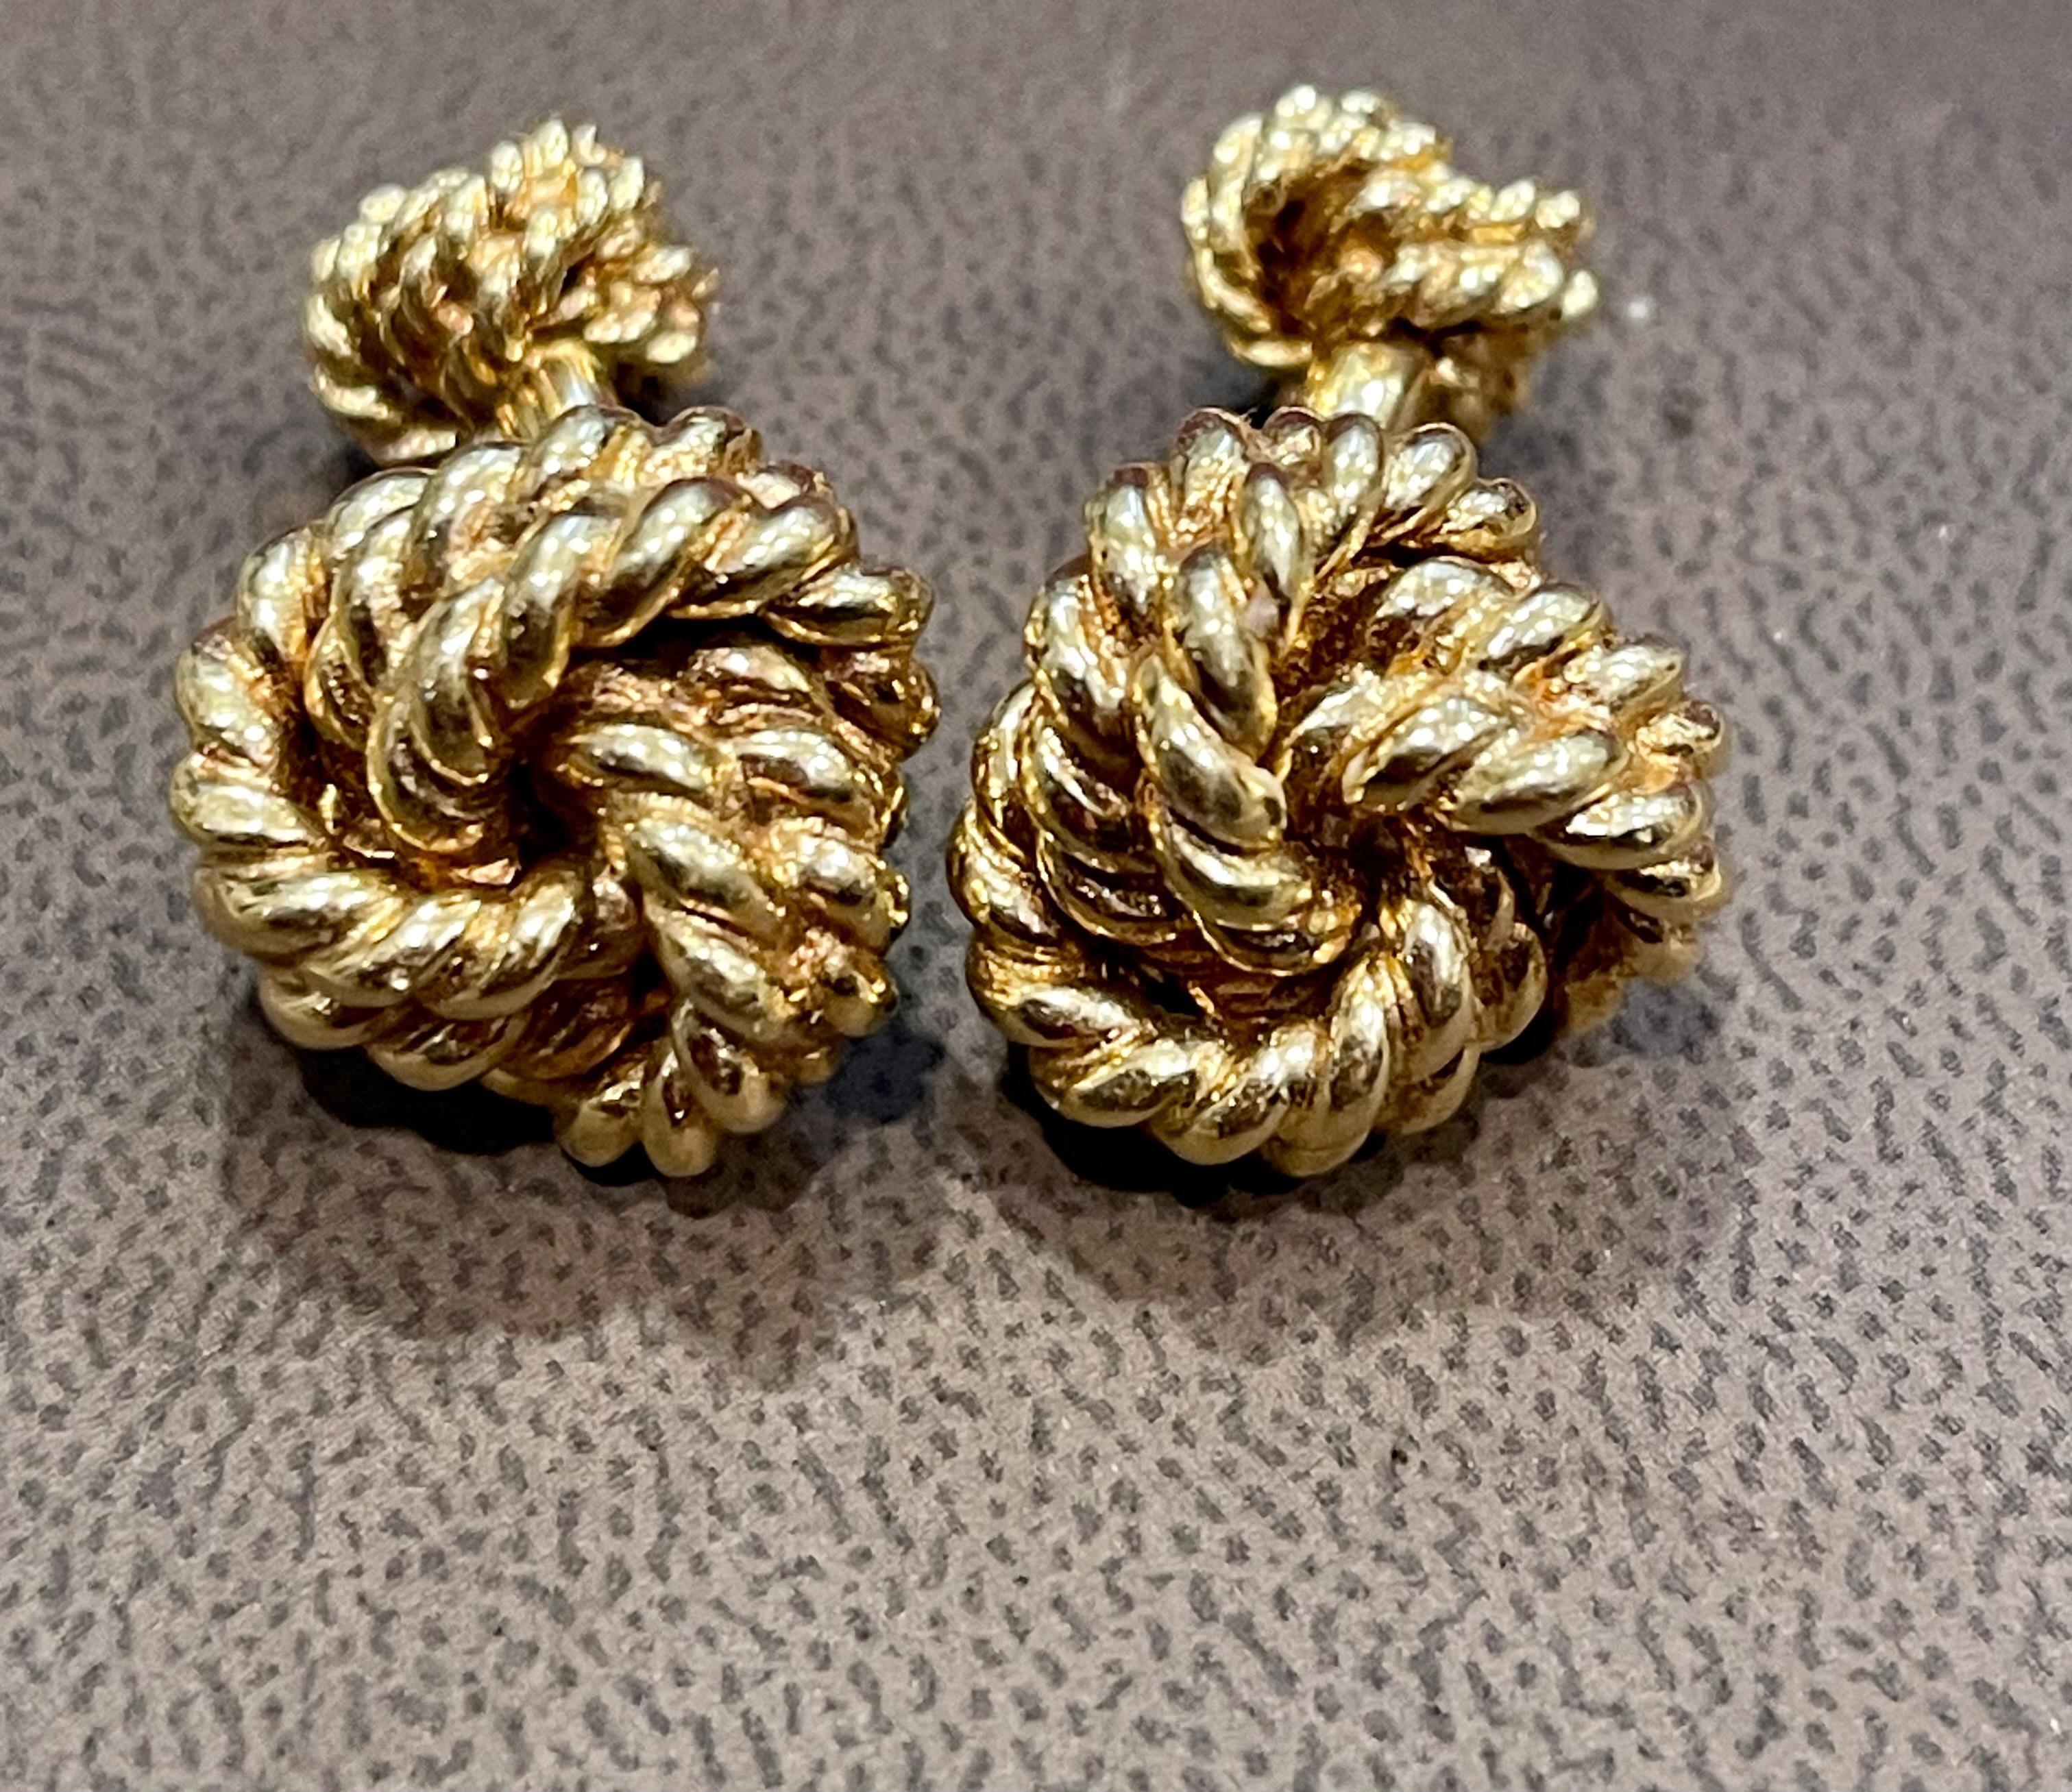 14k Gold Trinity Love Woven Knot Cuff Links in 14 Karat Yellow Gold 28 Gm, Men's For Sale 6